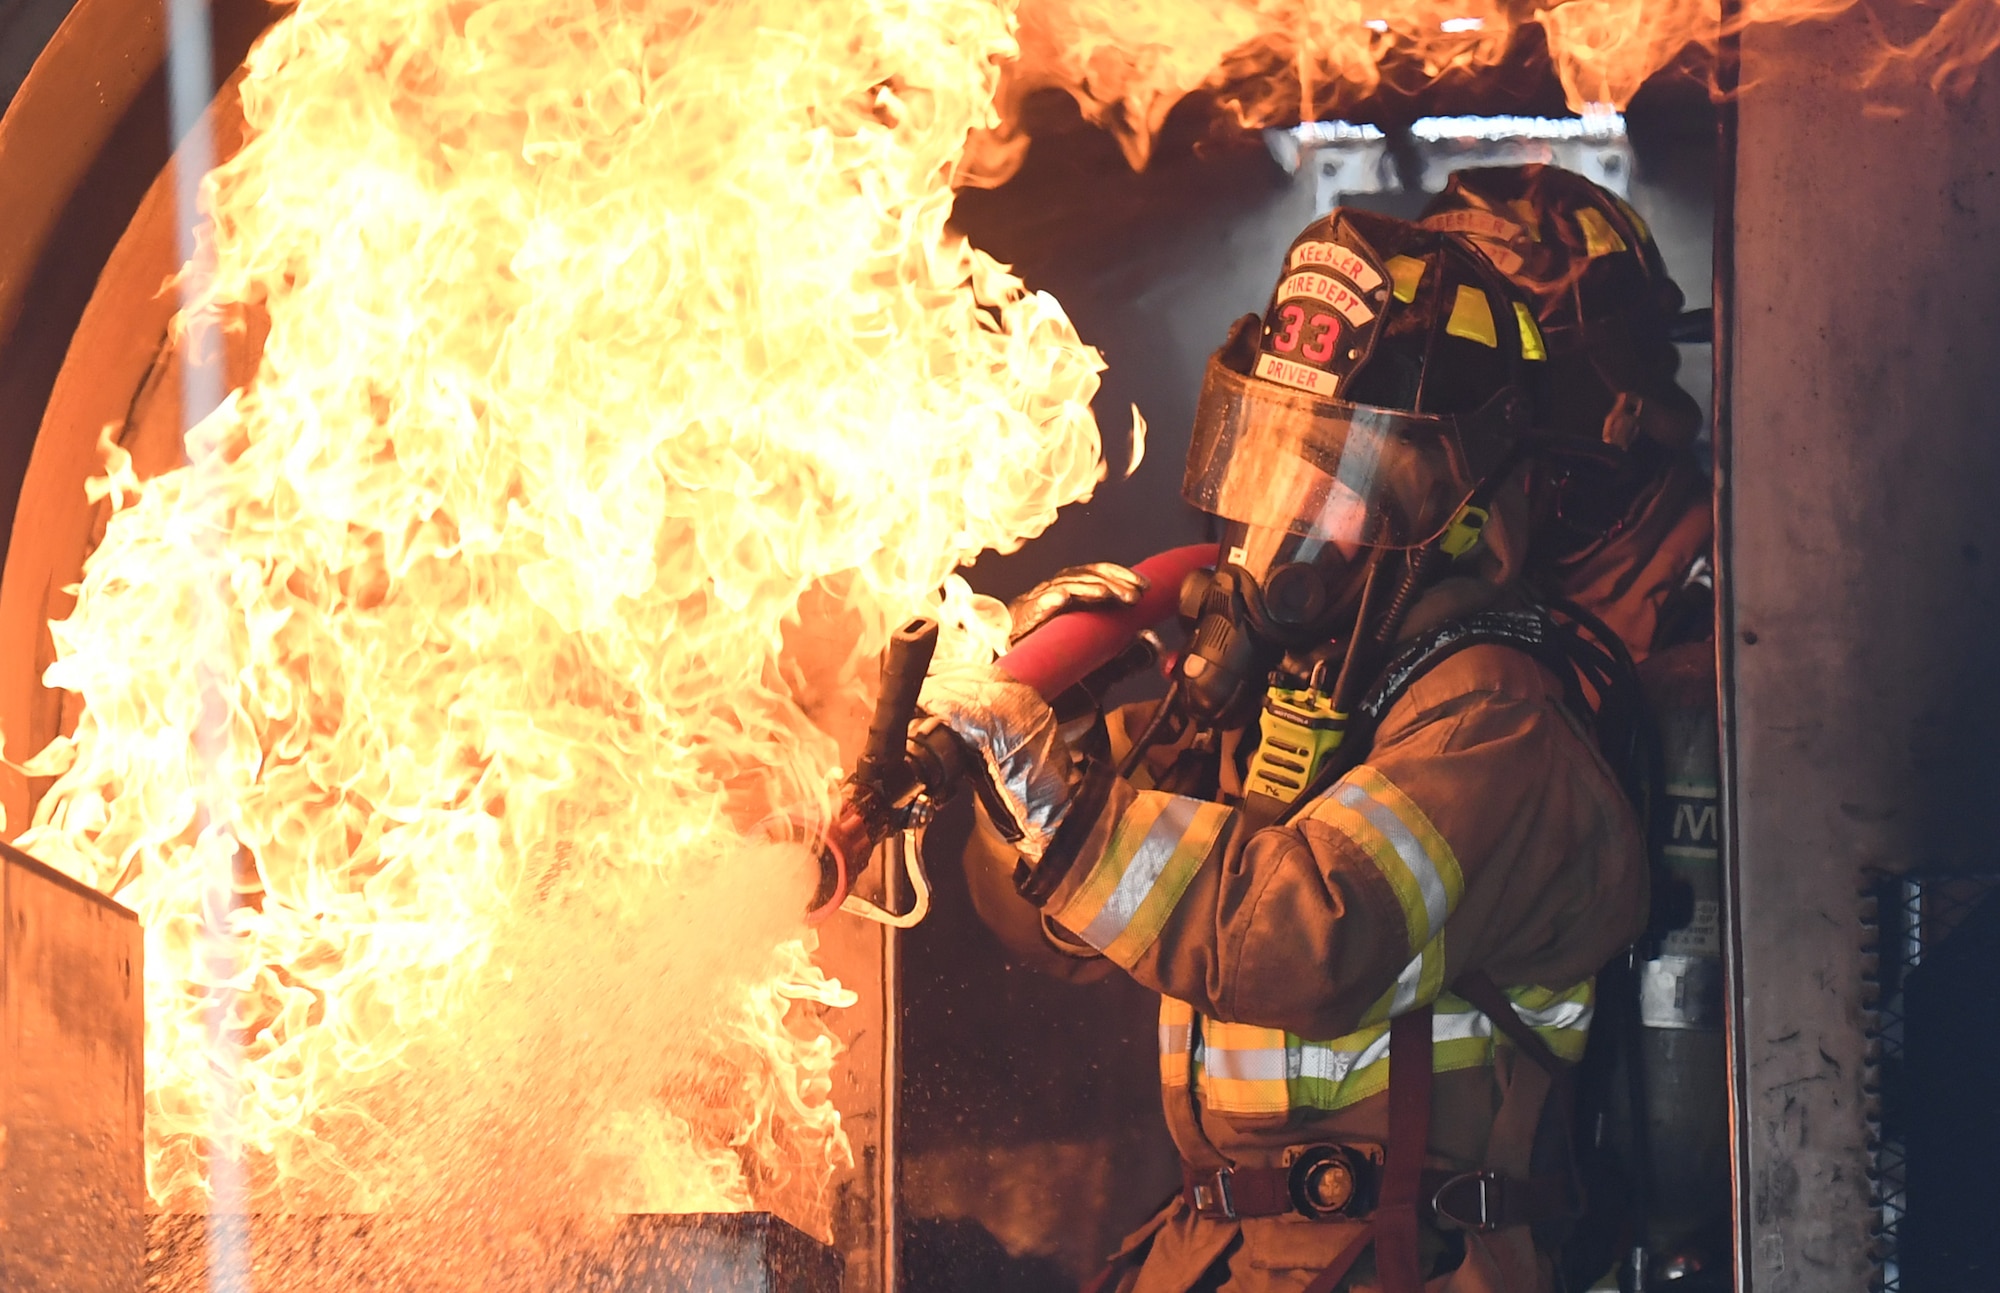 Cole Ballard and Seth Corn, 81st Infrastructure Division firefighters, use a hand-held hose to extinguish a fire inside a mock C-123 training device during an aircraft rescue fire fighting training exercise at Keesler Air Force Base, Mississippi, Nov. 8, 2019. The five-day joint agency training allowed the Keesler Fire Department and the Gulfport Combat Readiness Training Center Fire Department to meet the semi-annual training requirement to practice aircraft rescue and live fire training evolutions. (U.S. Air Force photo by Kemberly Groue)